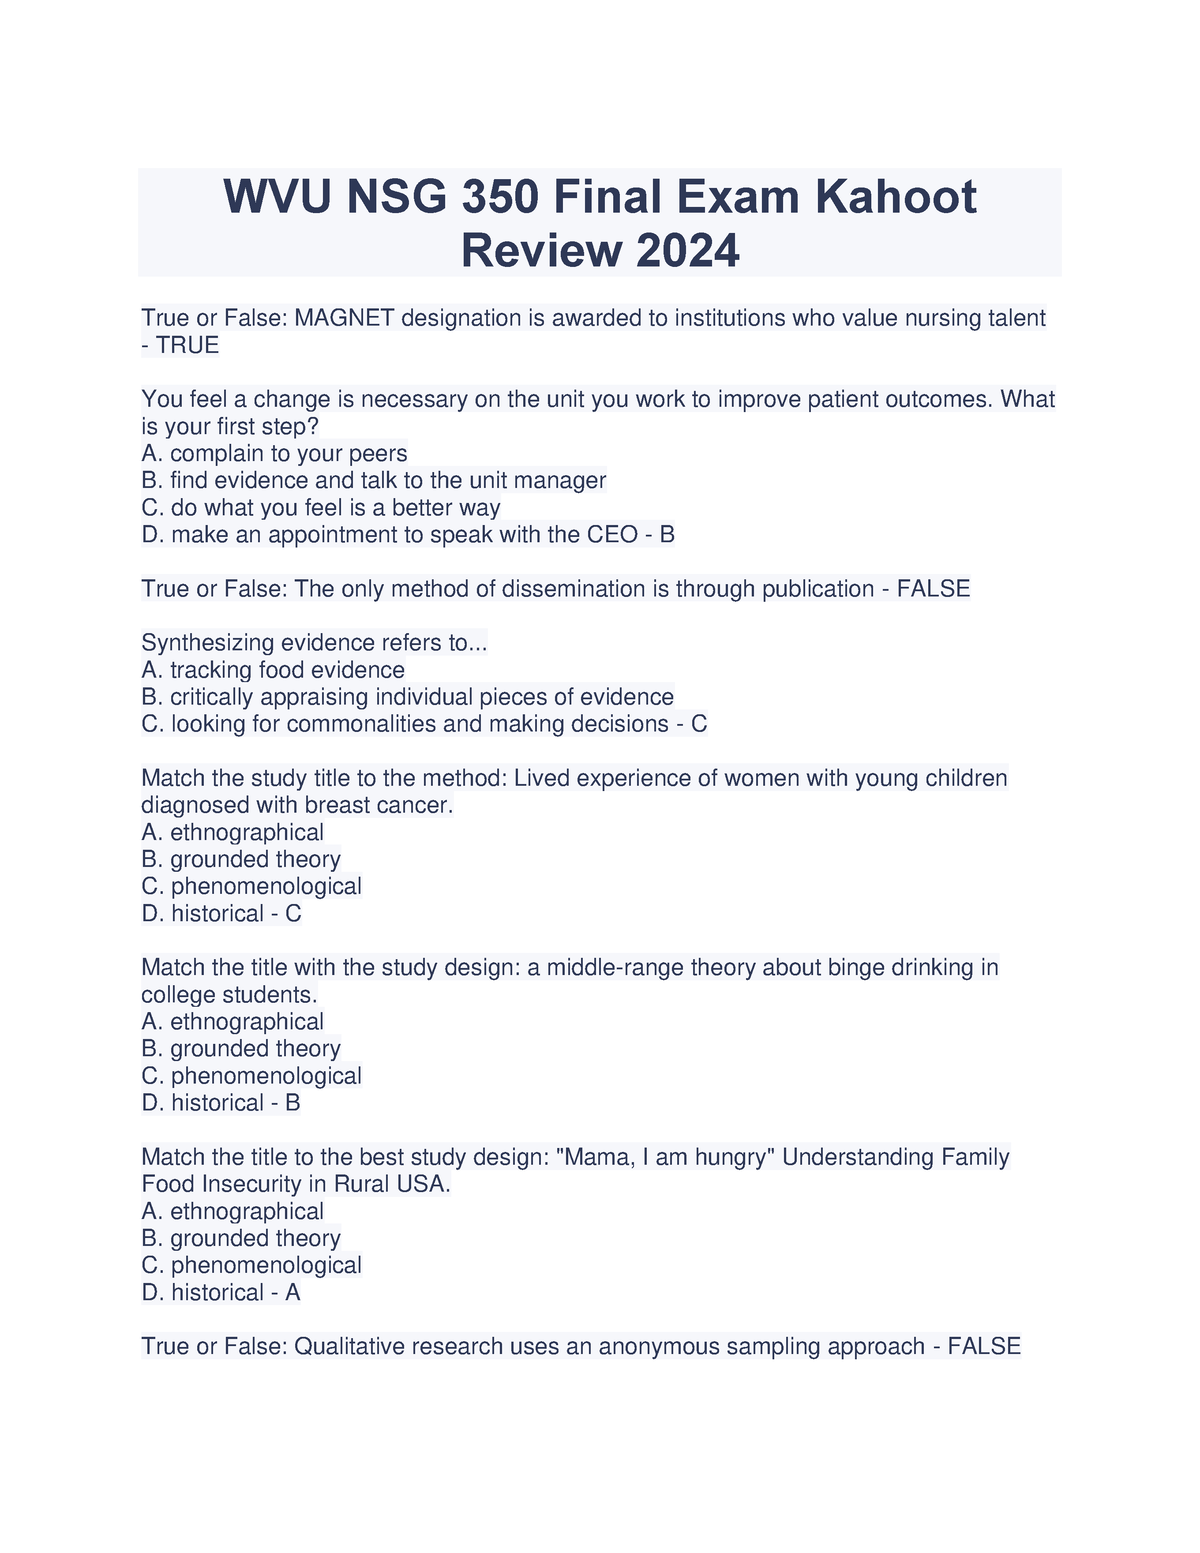 WVU NSG 350 Final Exam Kahoot Review 2024 What is your first step? A